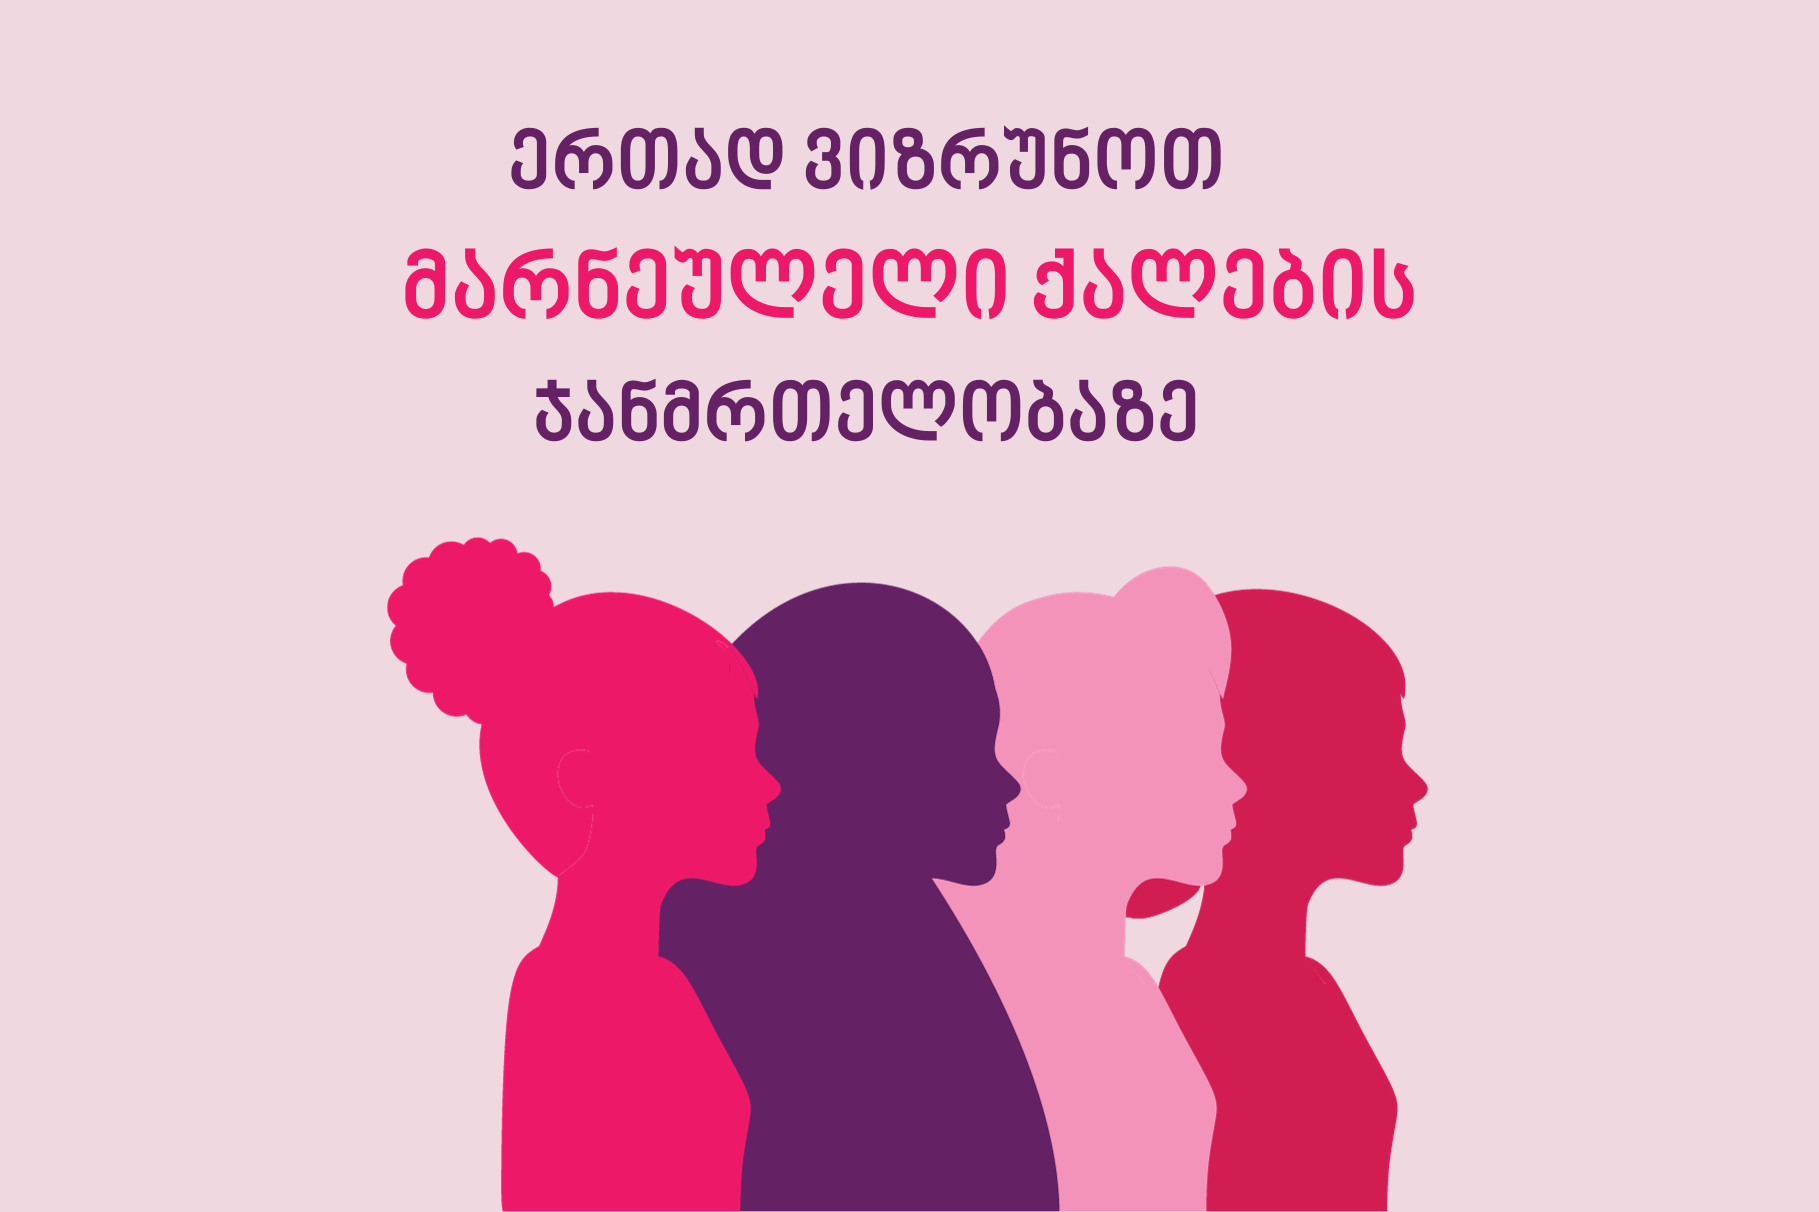 Let’s take care of the health of women from Marneuli